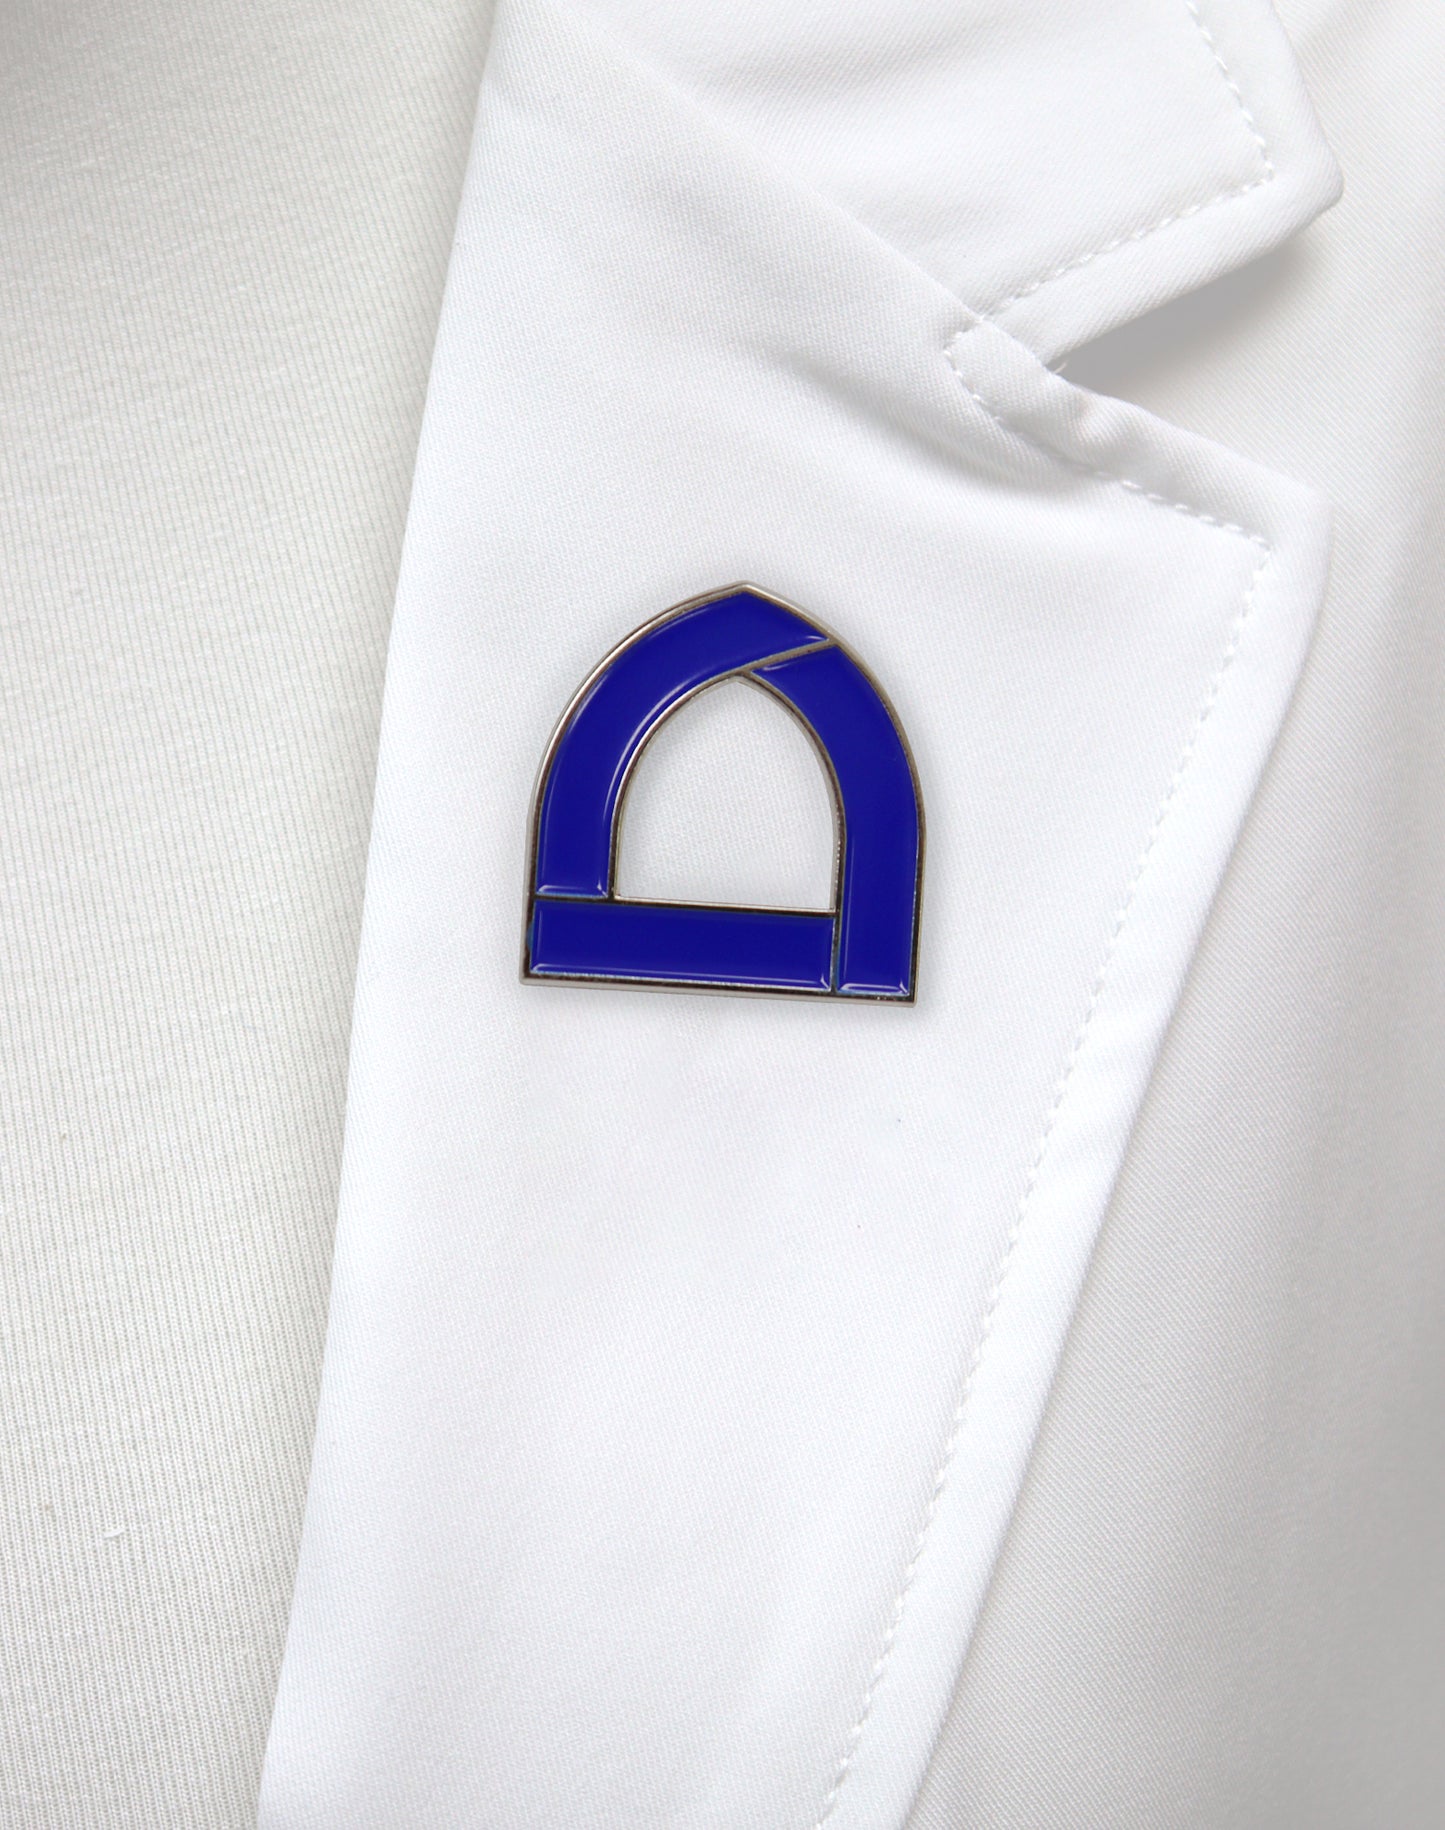 Higher College of Technology Pin